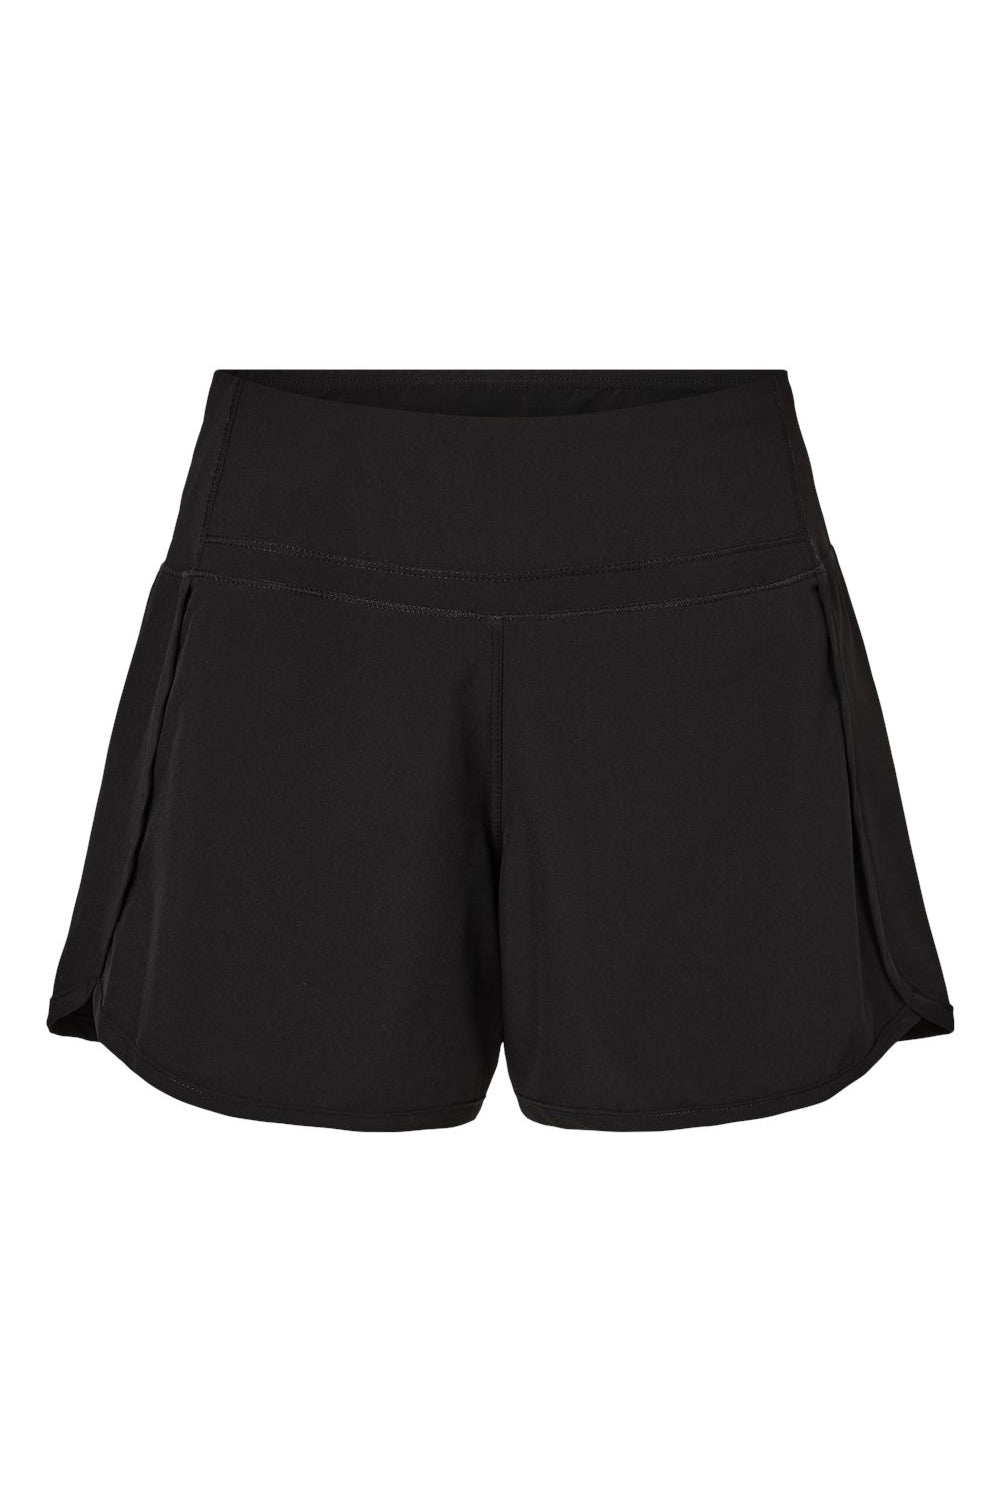 Boxercraft BW6103 Womens Stretch Woven Lined Shorts Black Flat Front